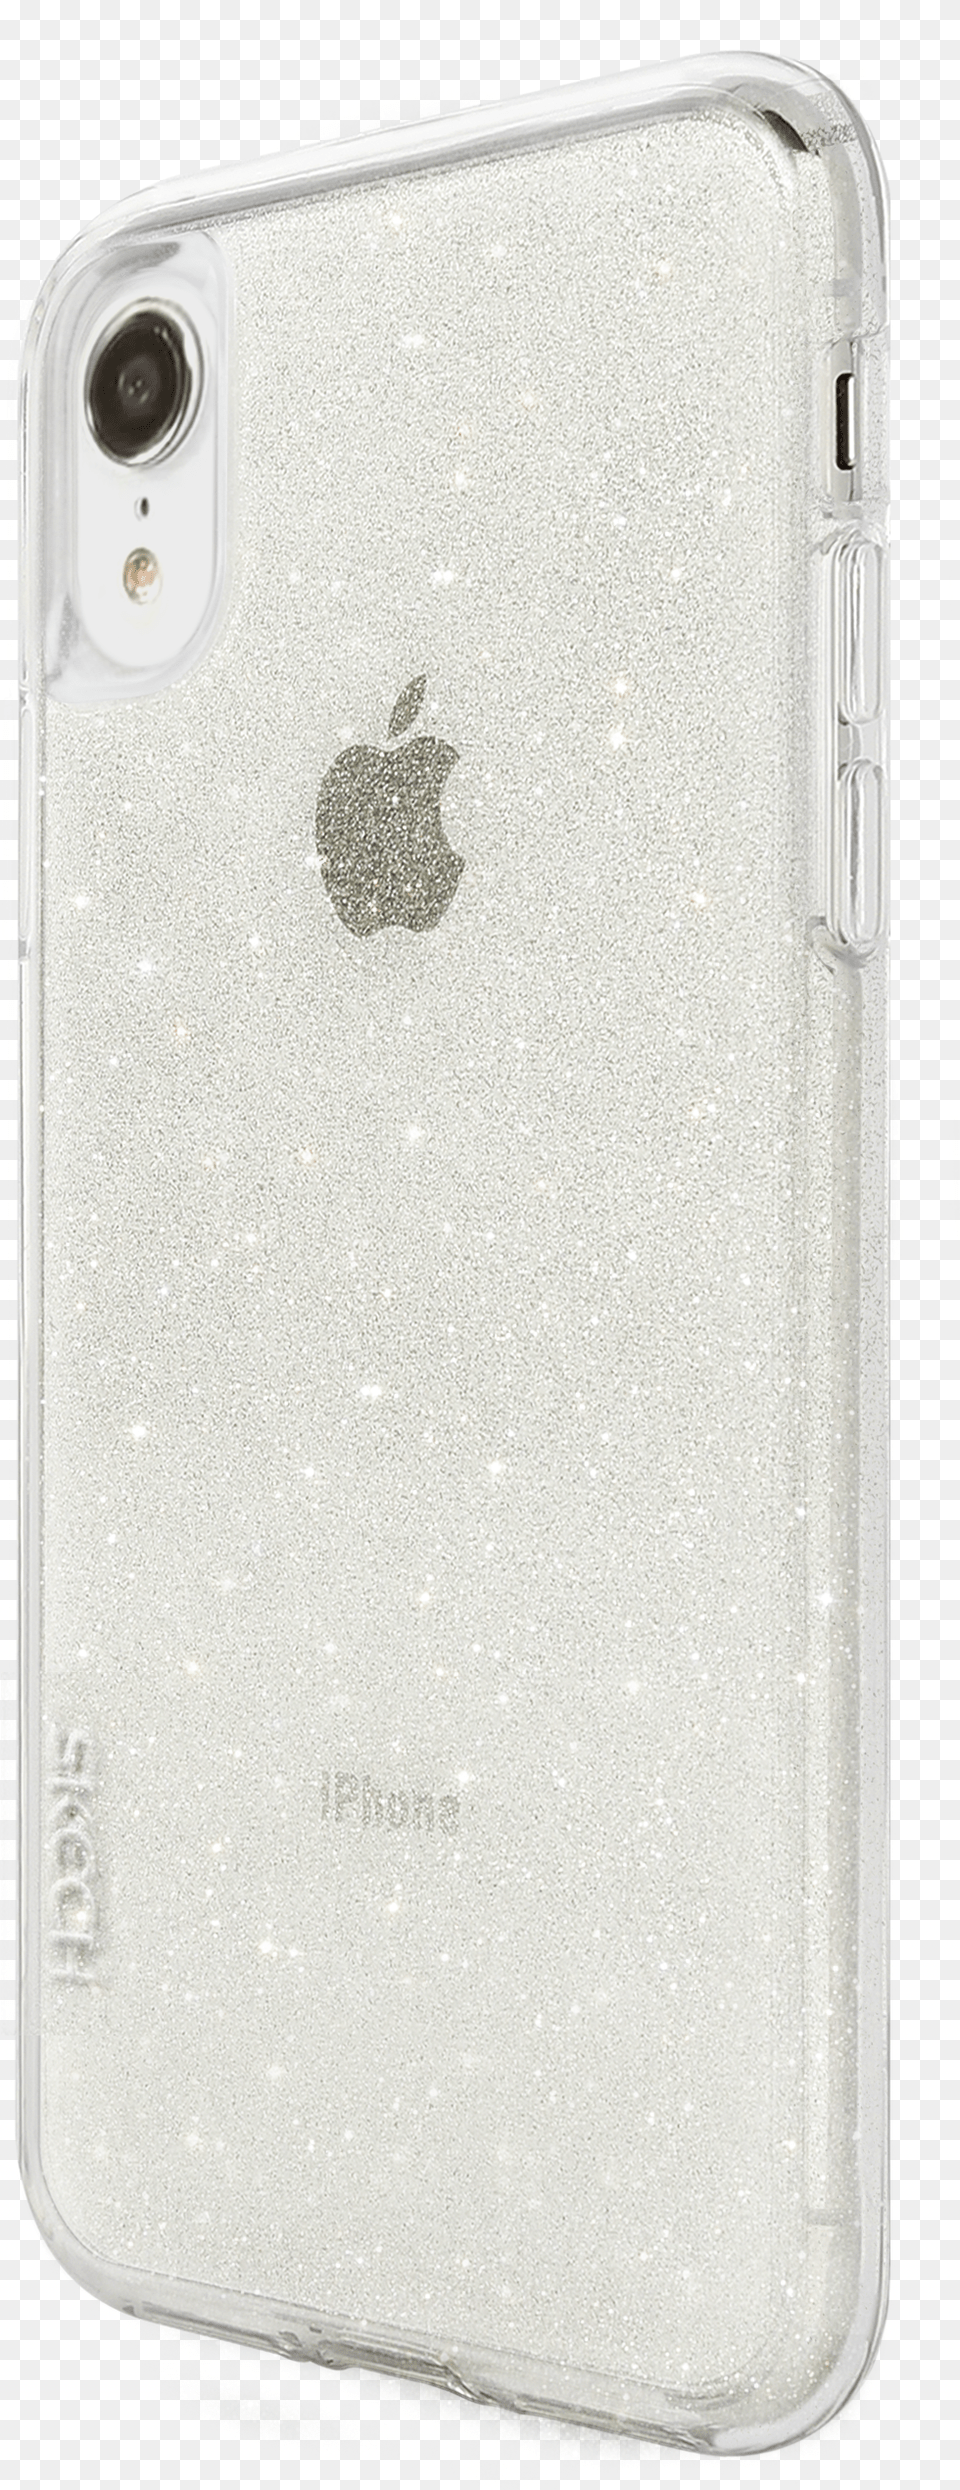 Sparkle Texture Smartphone, Electronics, Mobile Phone, Phone Free Png Download